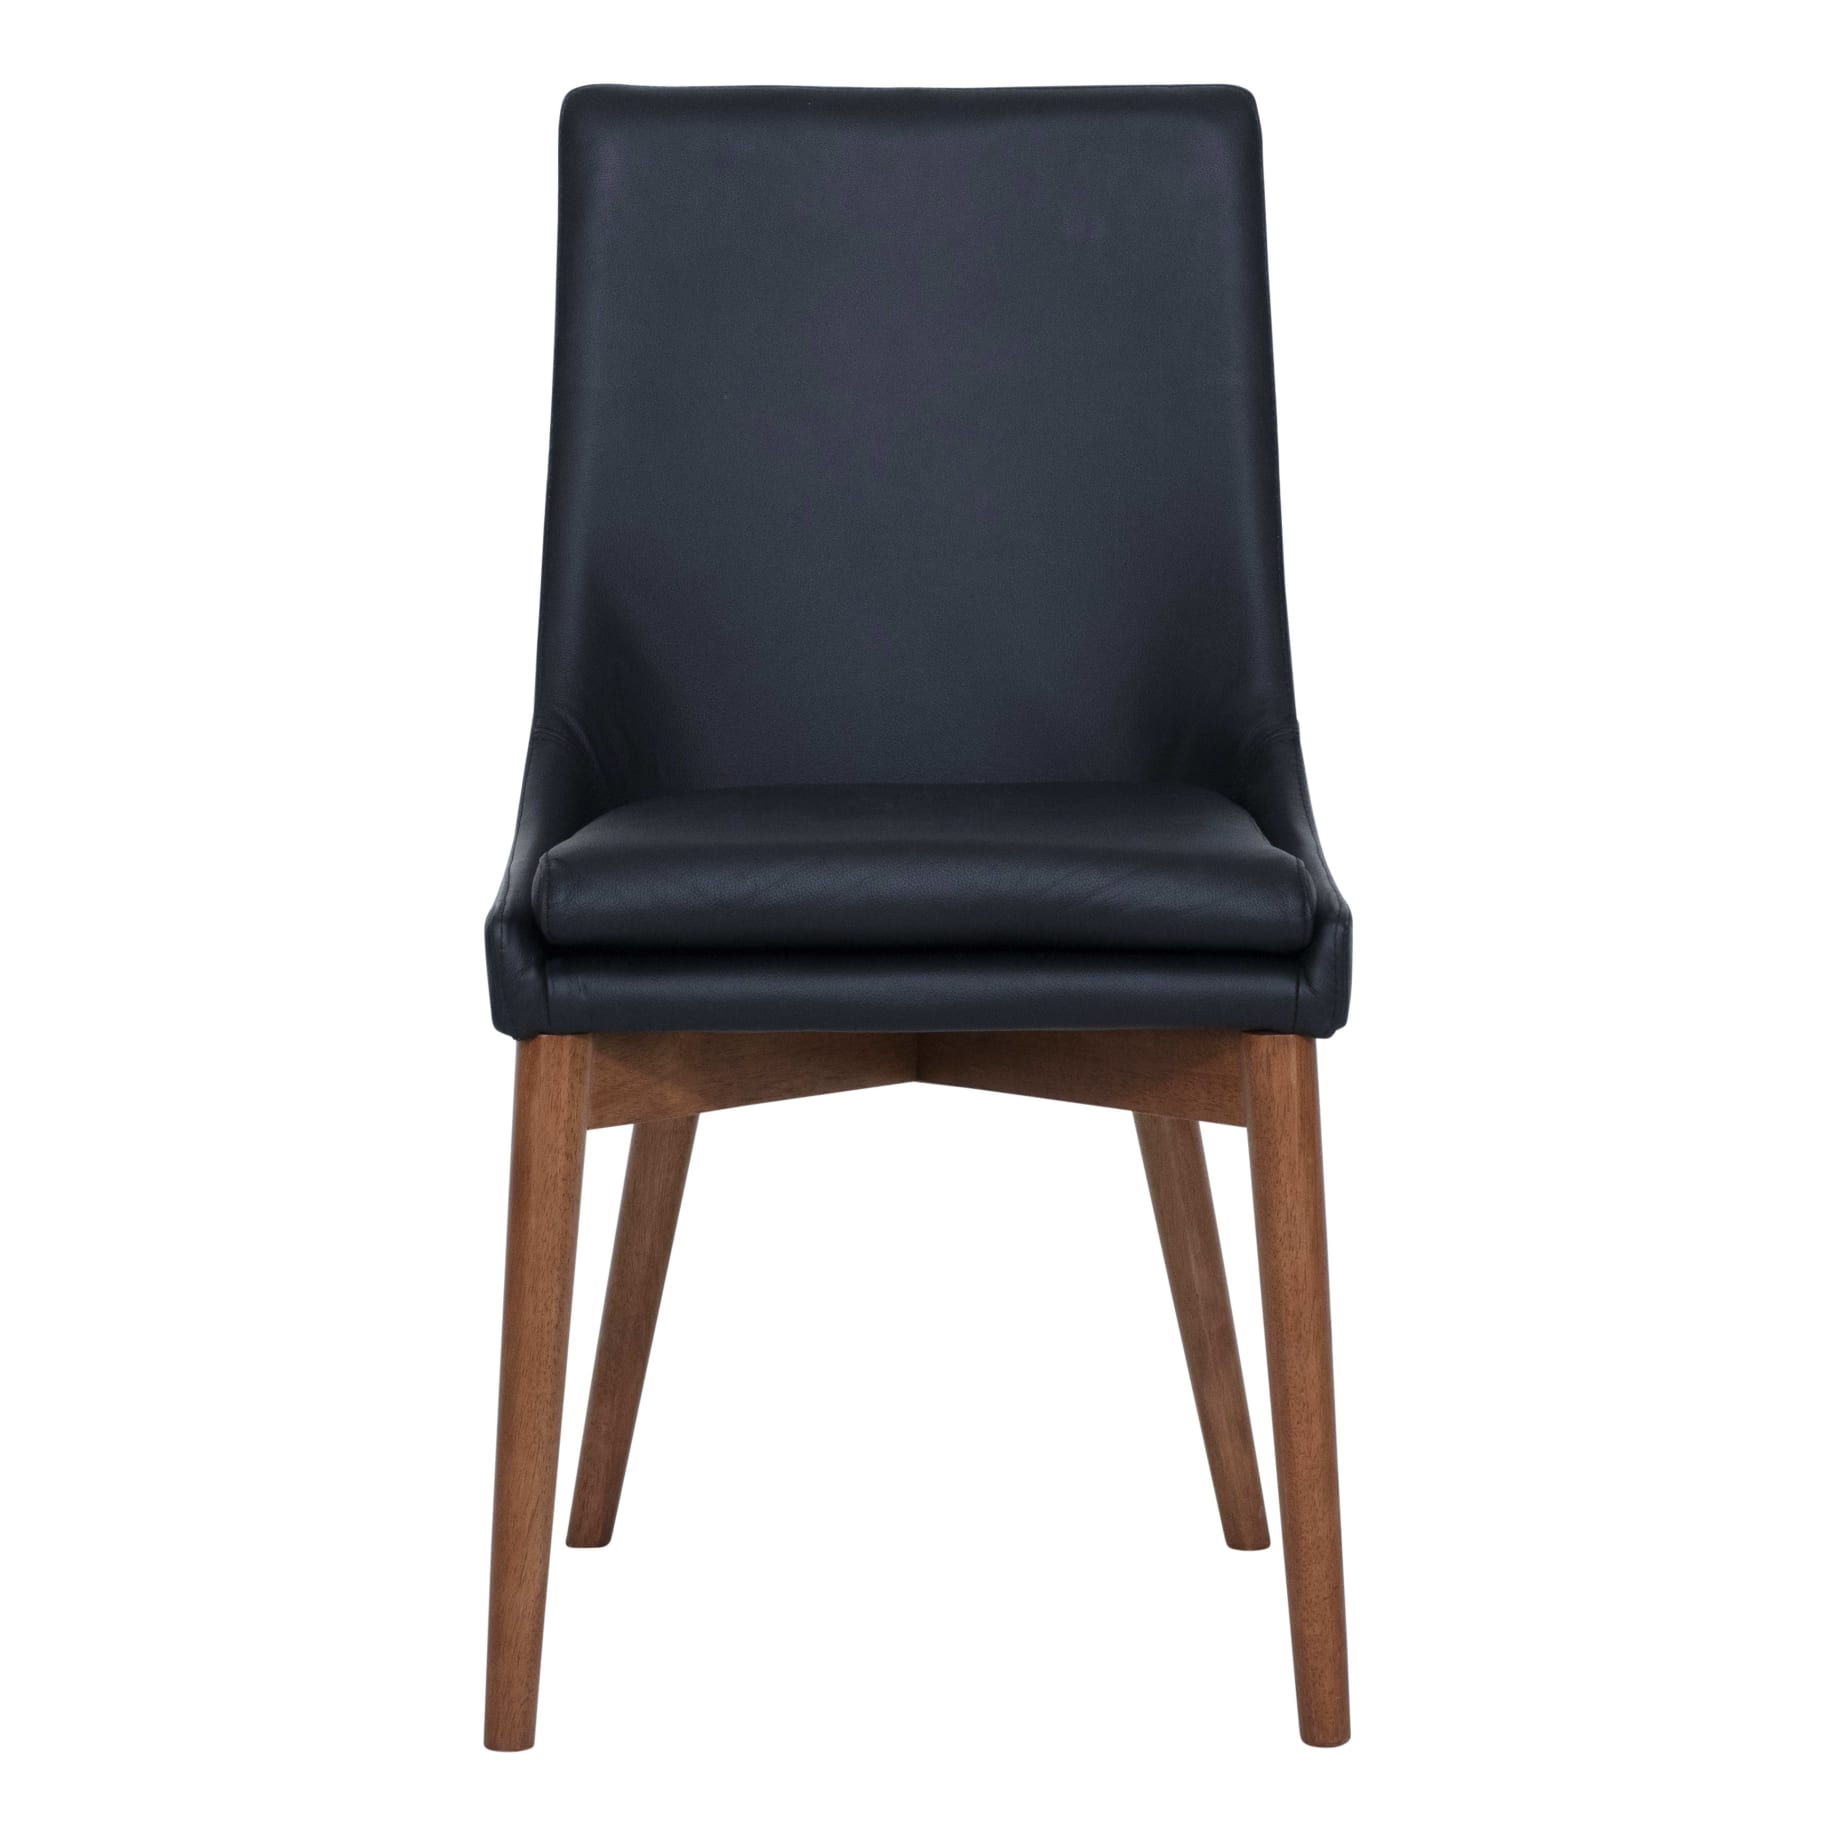 Highland Dining Chair in Black / Blackwood Stain